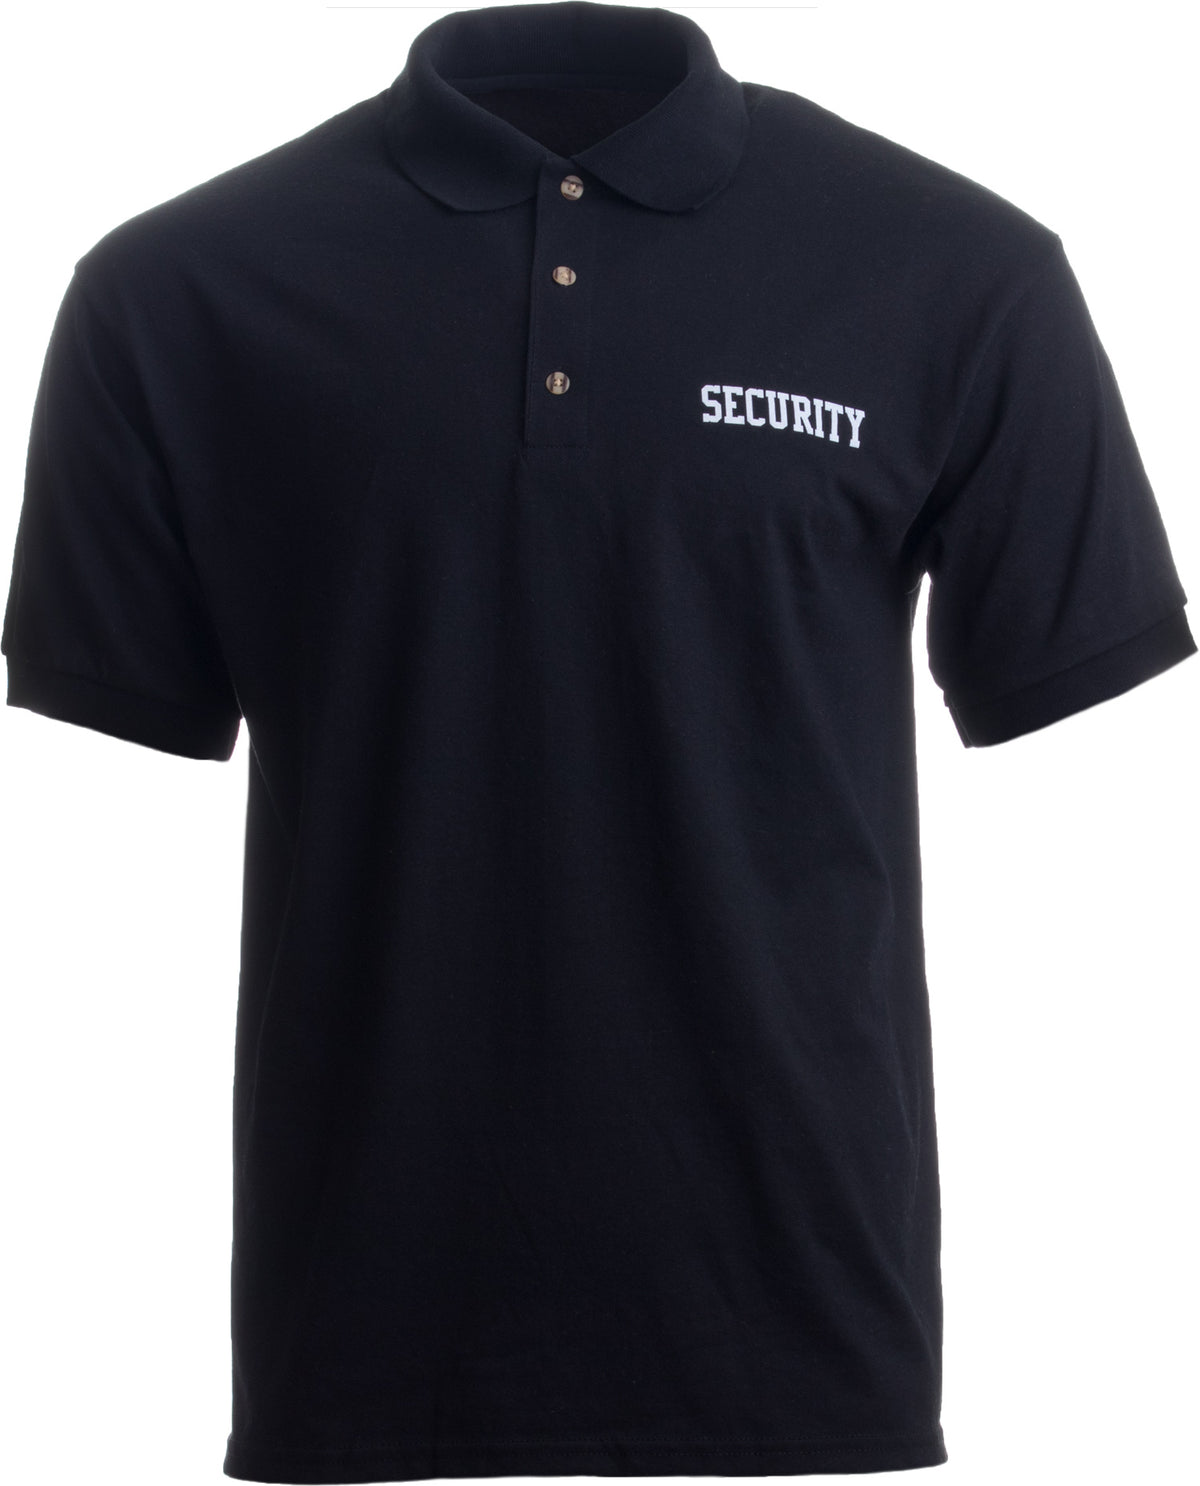 SECURITY | Professional Security Officer, Guard Unisex DryBlend Collared Shirt